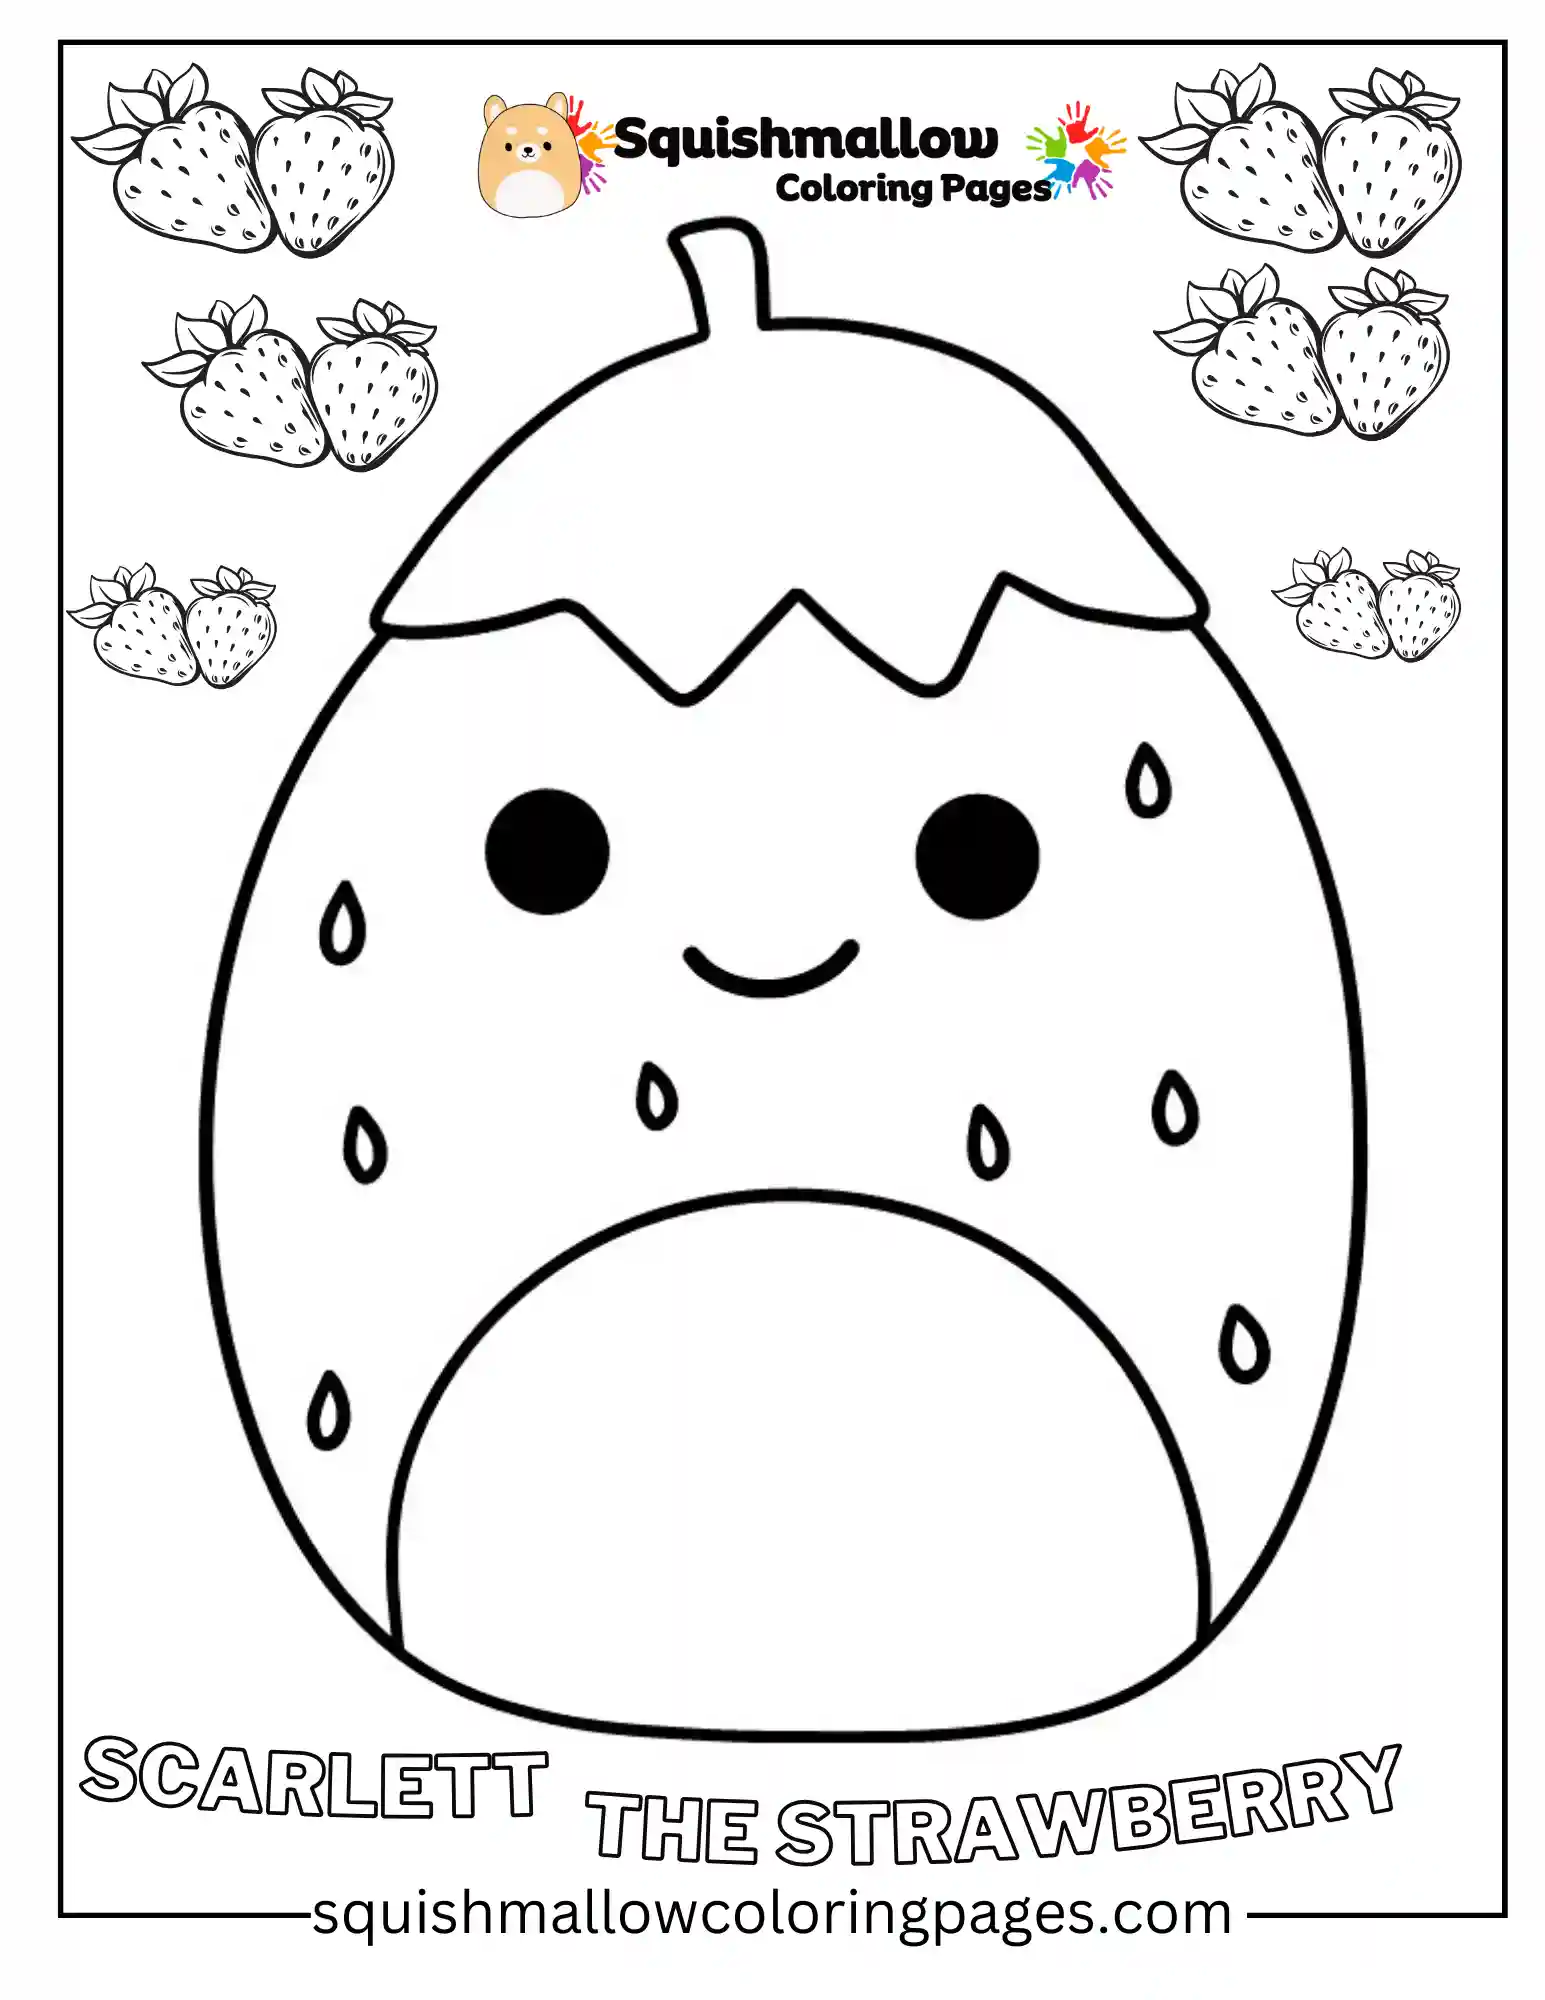 Scarlett The Strawberry Squishmallow Coloring Pages